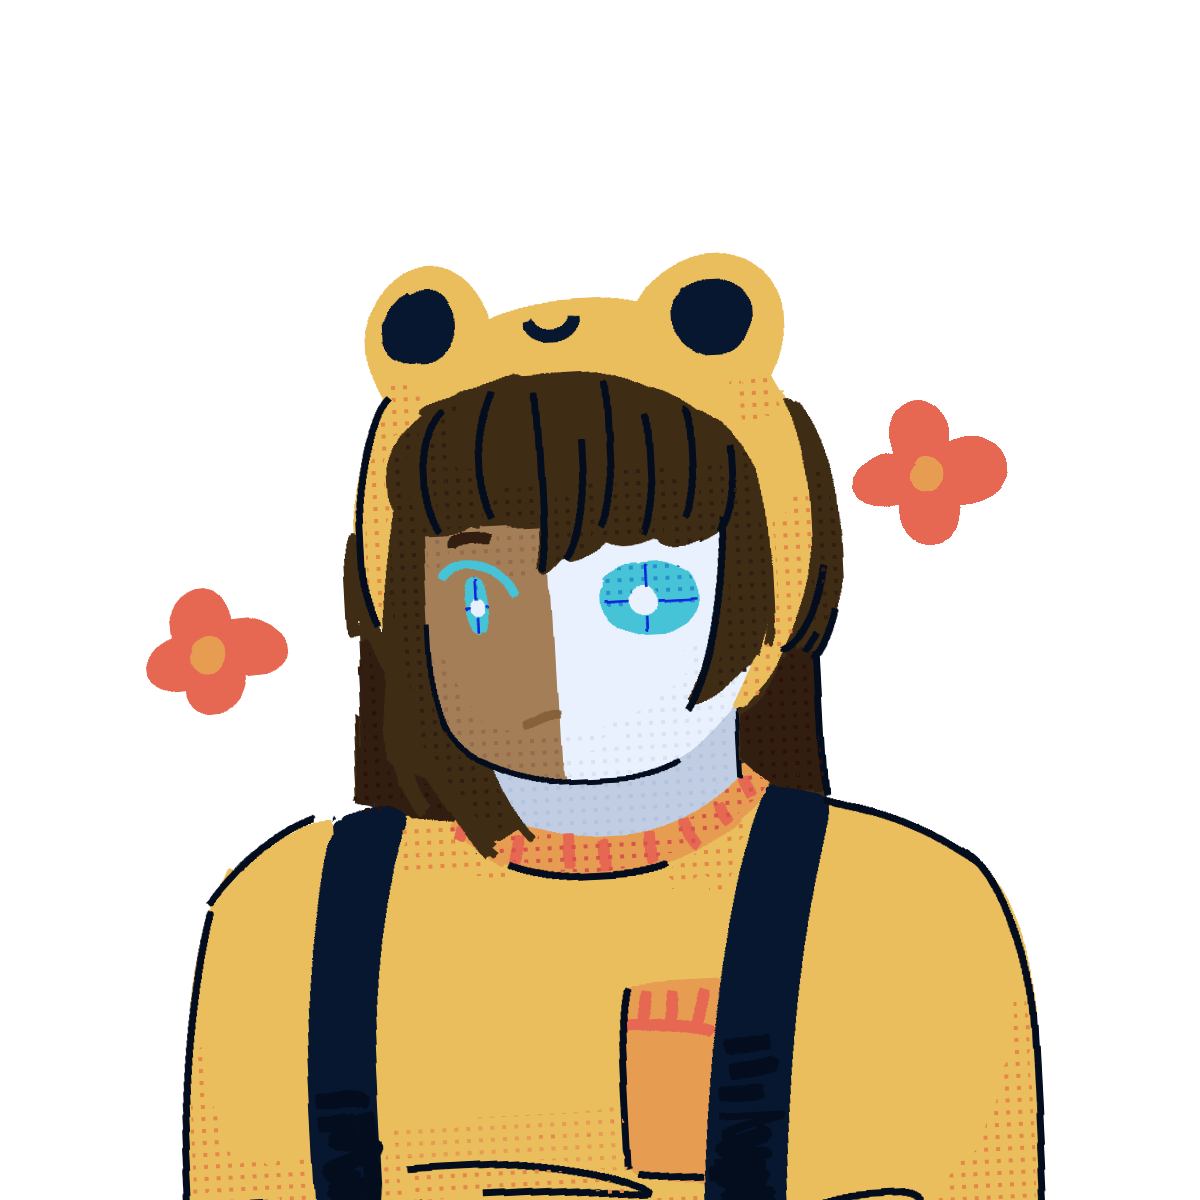 a half body doodle of Roxanne wearing a bright yellow sweater and a matching headband that resembles a frog